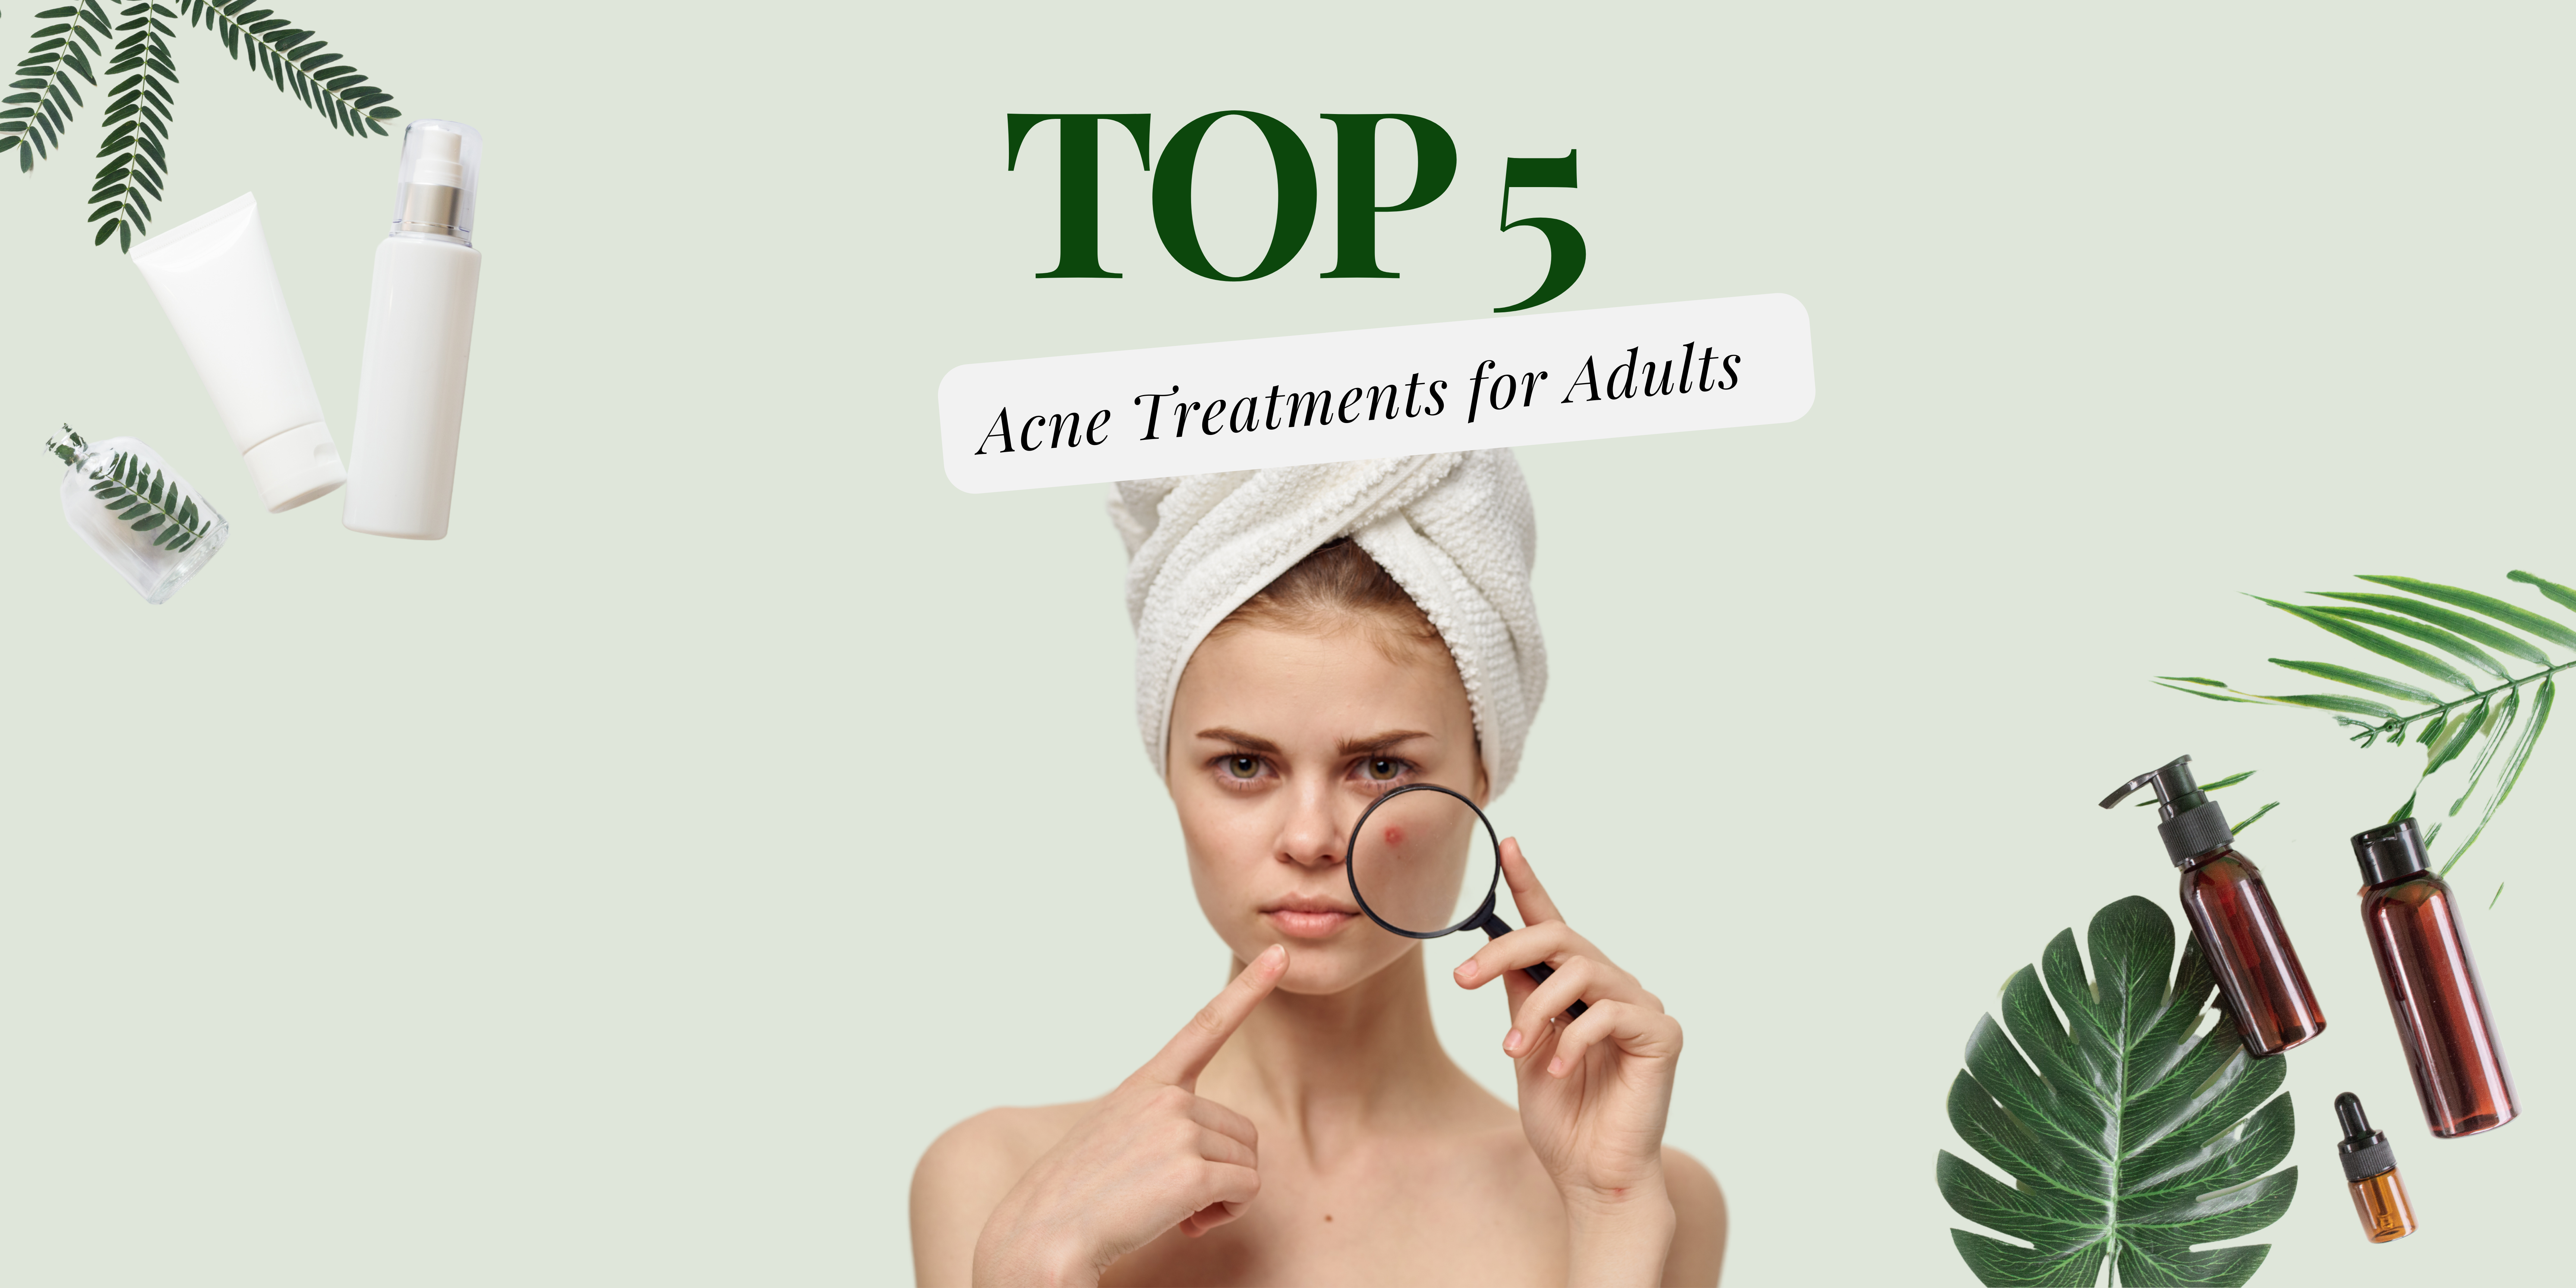 Top 5 Acne Treatments for Adults